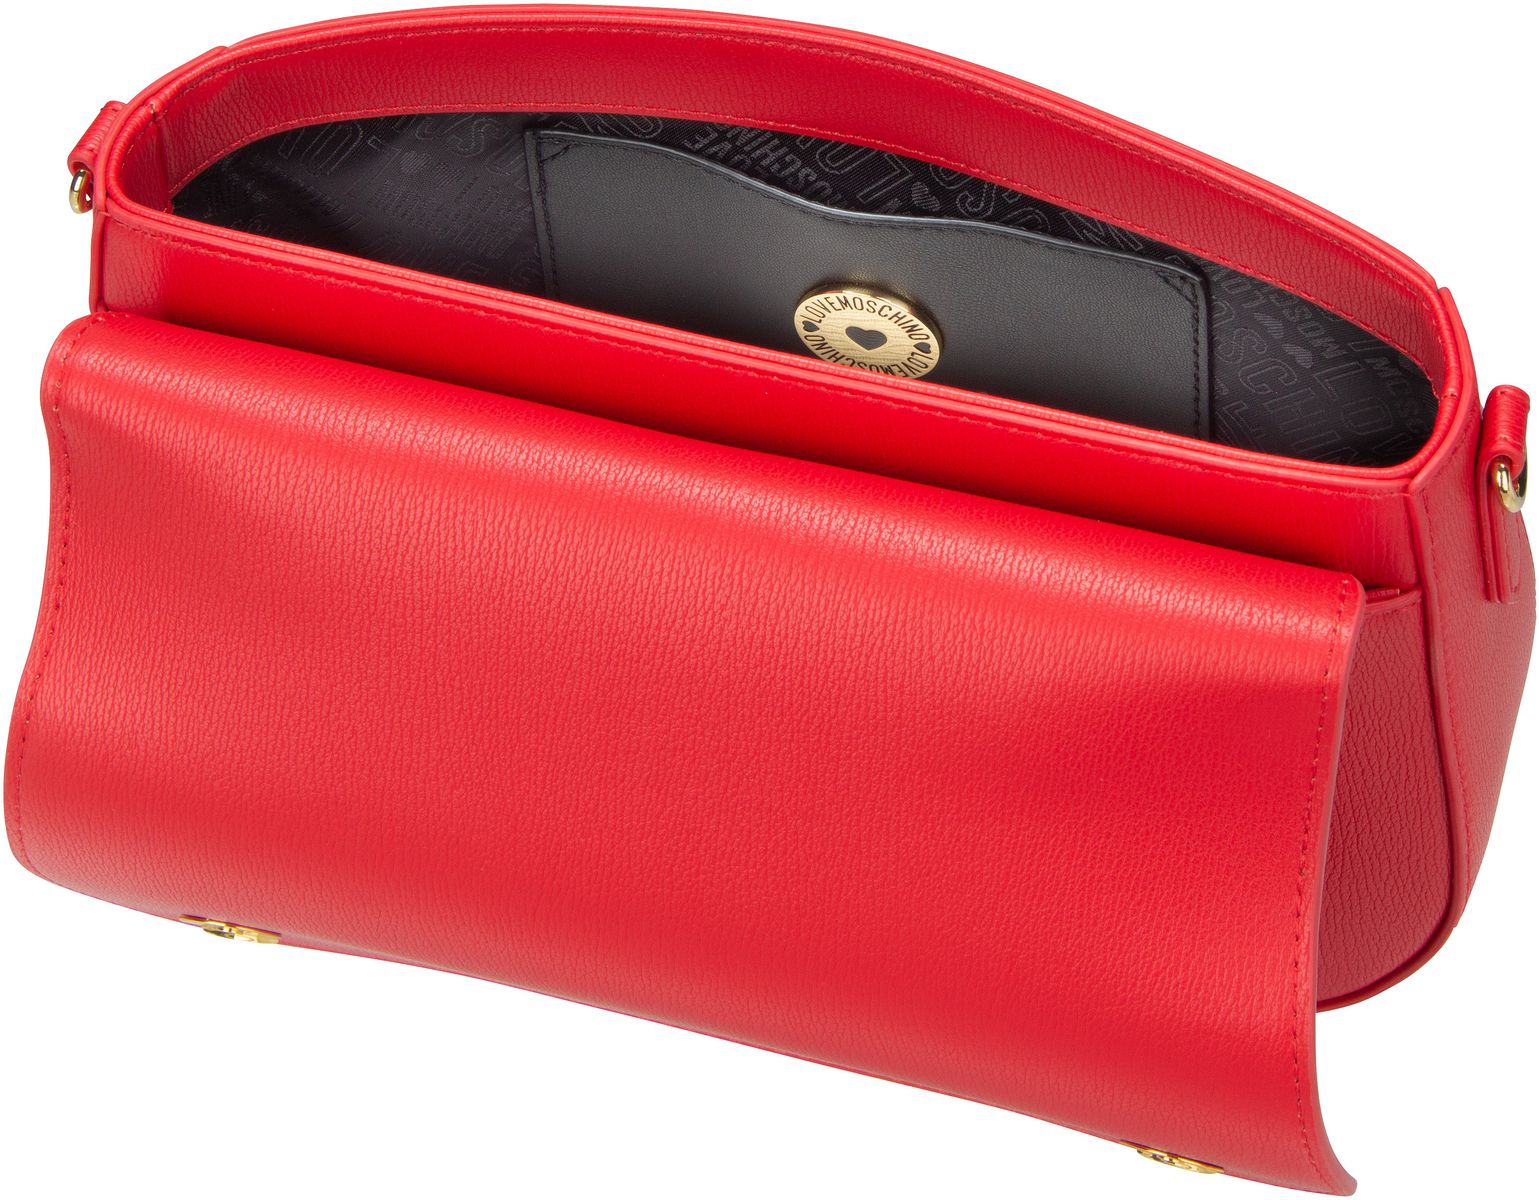 Love Moschino Fancy Heart Handle Bag 4084 - Red